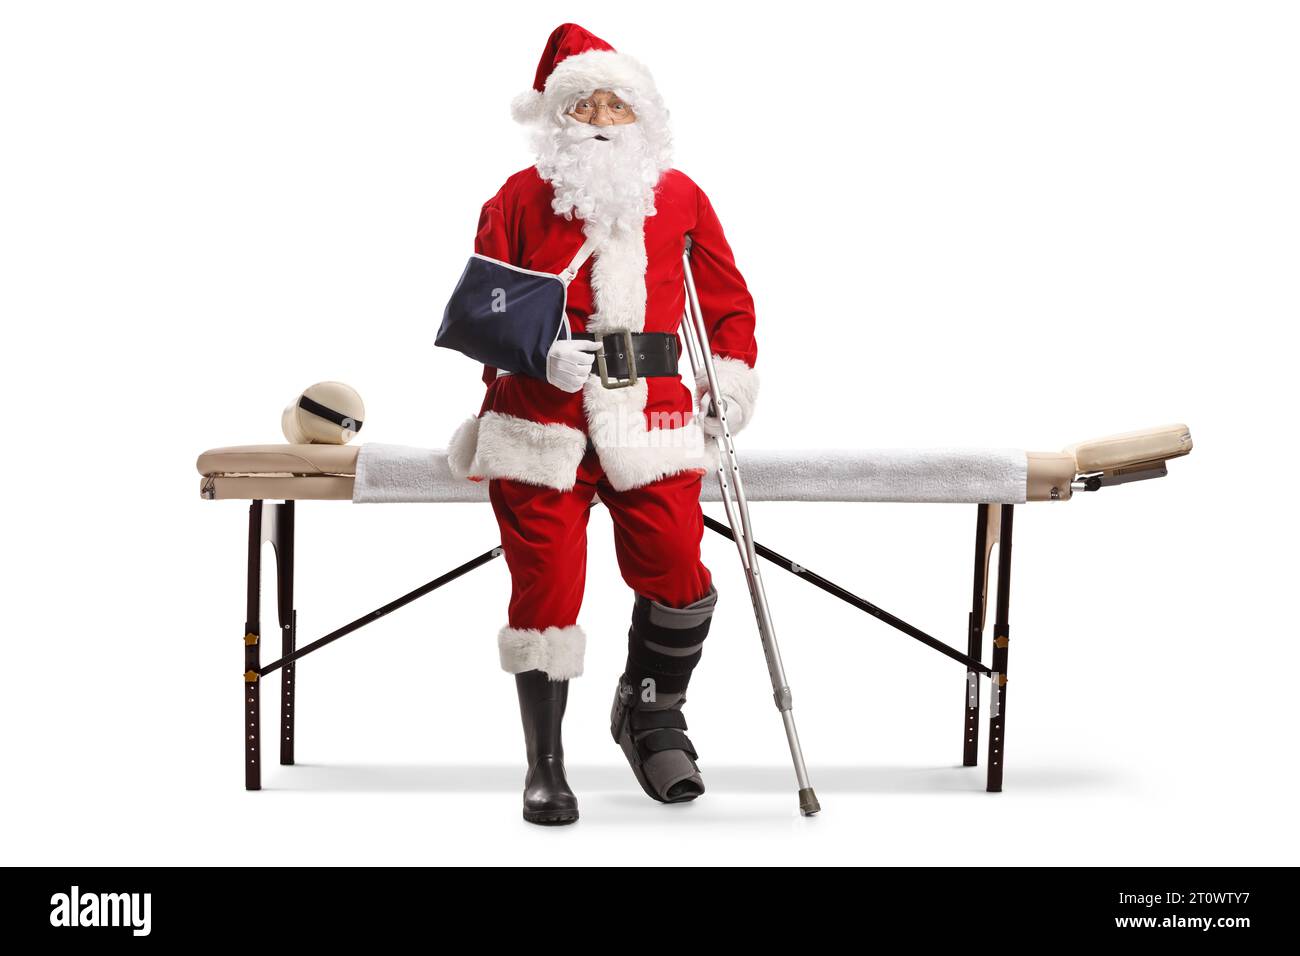 Santa claus with injured leg and arm standing in front of a mat table isolated on white background Stock Photo